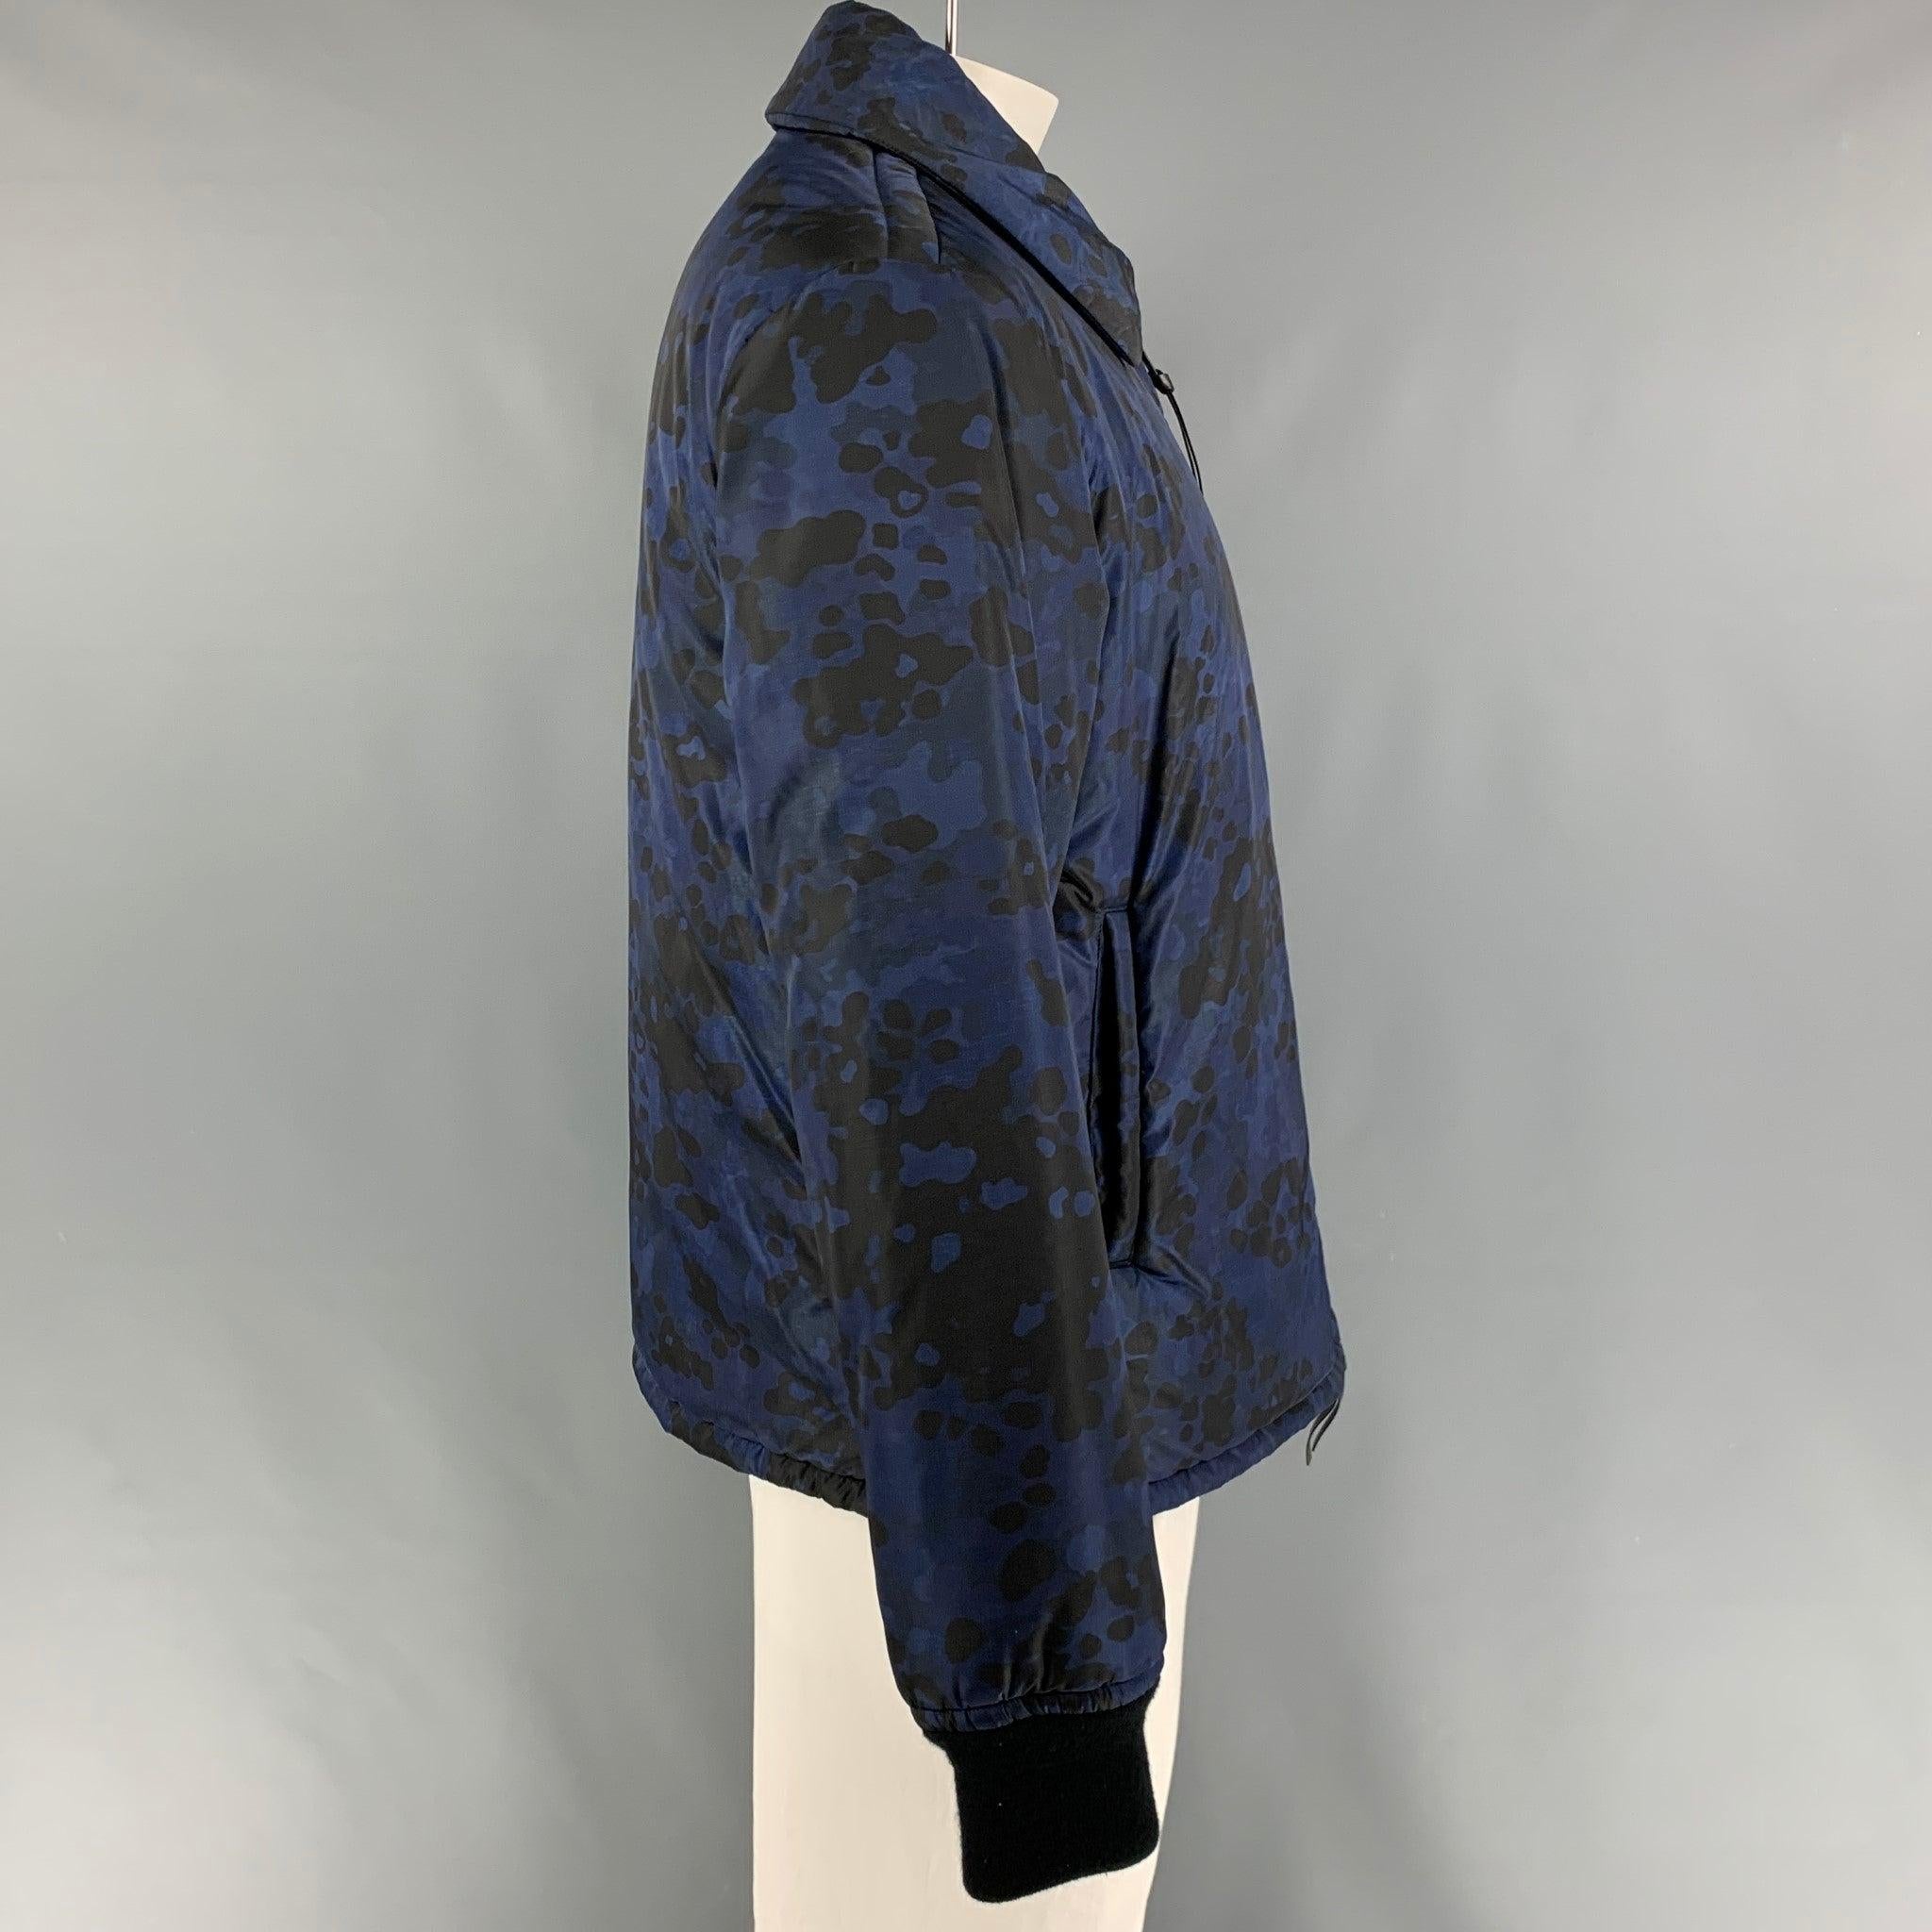 BURBERRY Fall 2015 by Christopher Bailey jacket comes in a navy & blue camouflage polyamide featuring a ribbed hem, slit pockets, spread collar, and a full zip up closure. Made in Italy.
Very Good
Pre-Owned Condition. 

Marked:   52 

Measurements: